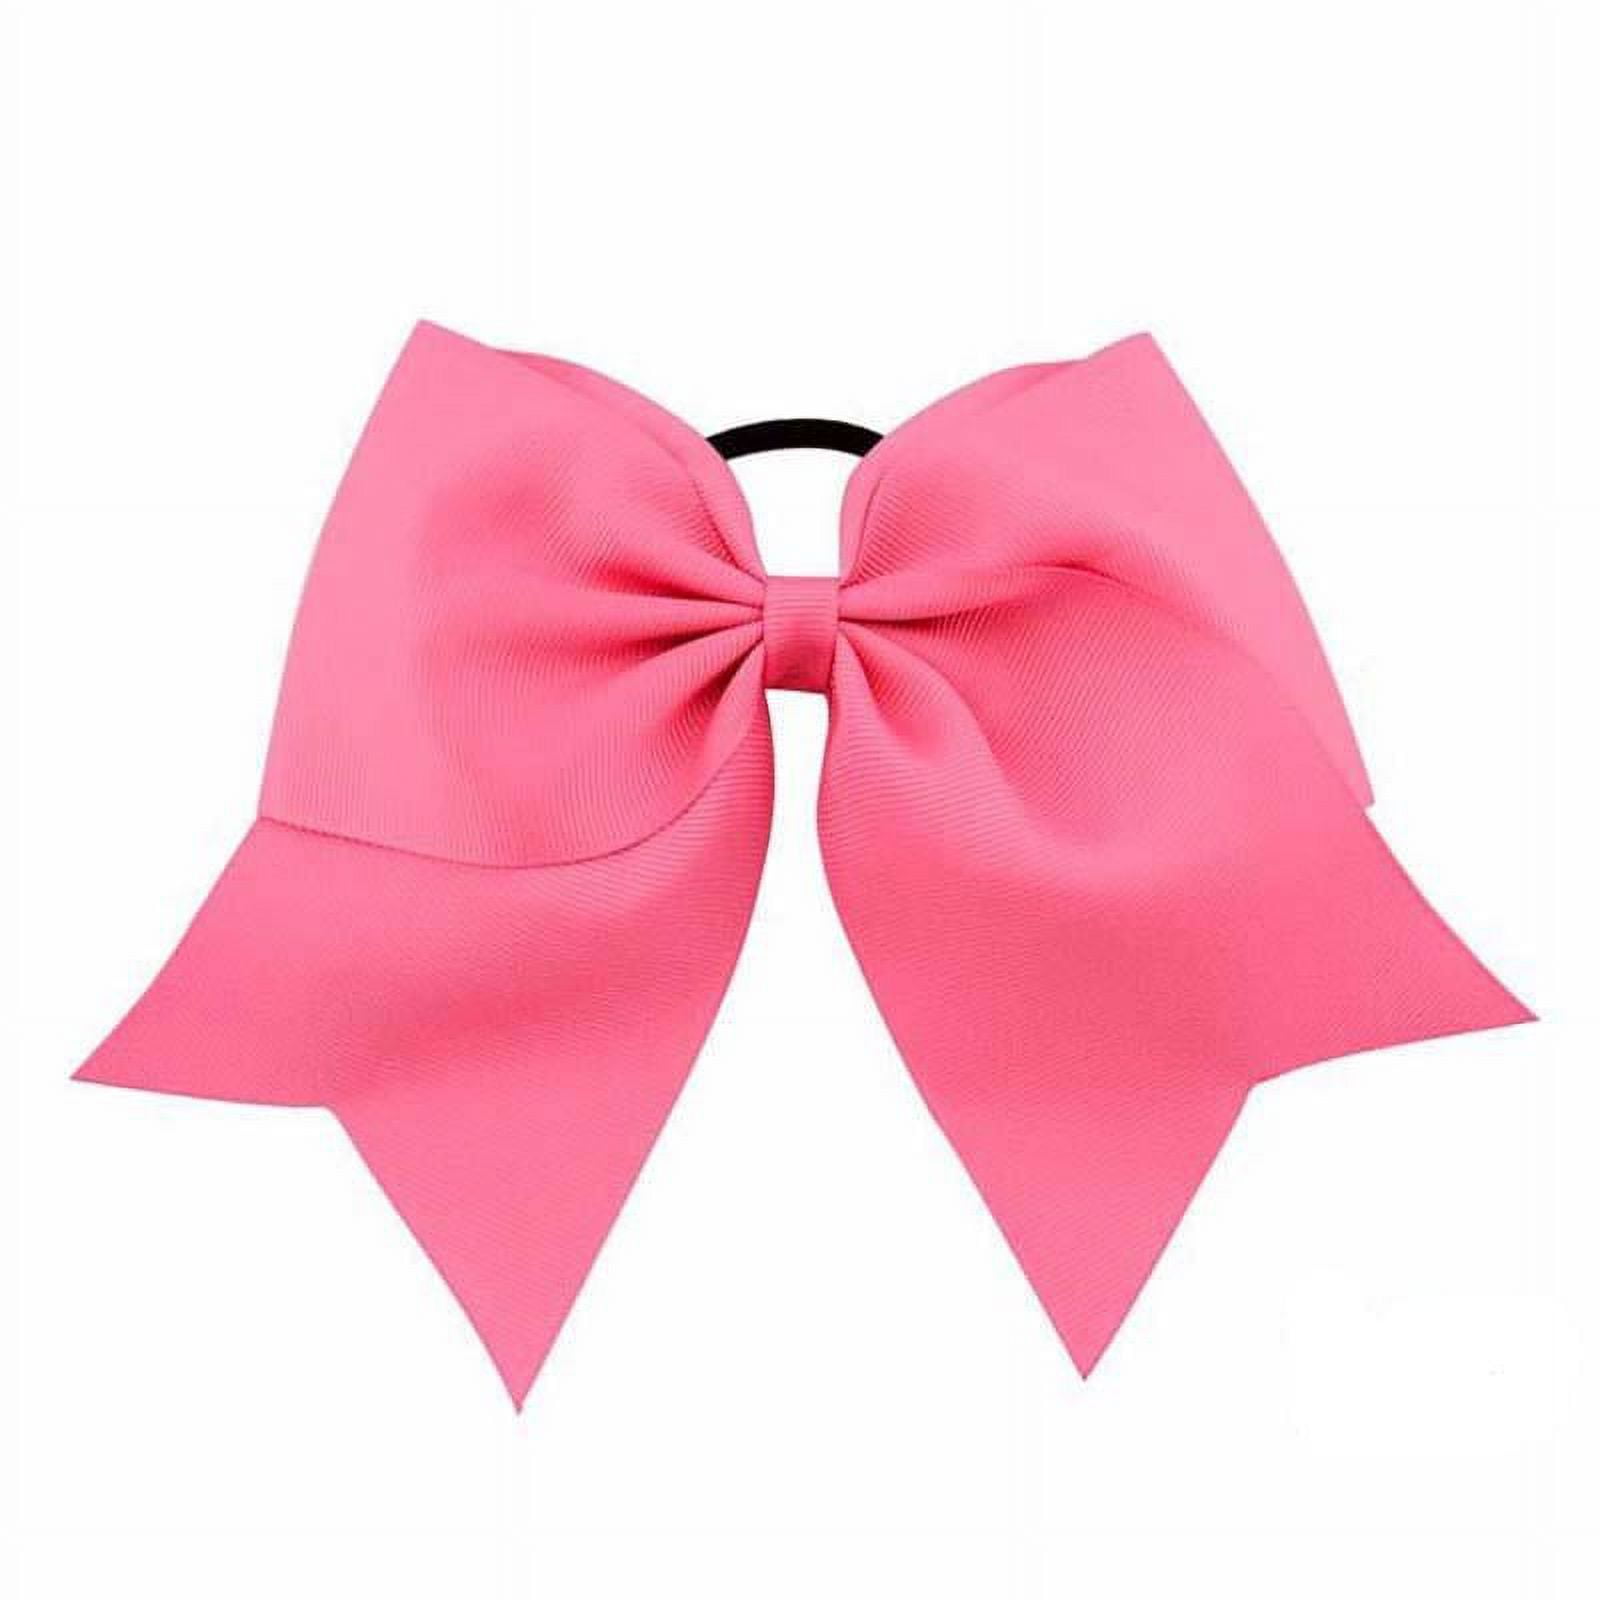 Pink Cheer Bows, Pink Volleyball Ponytail Bows, Hot Pink Softball Bows –  Accessories by Me, LLC